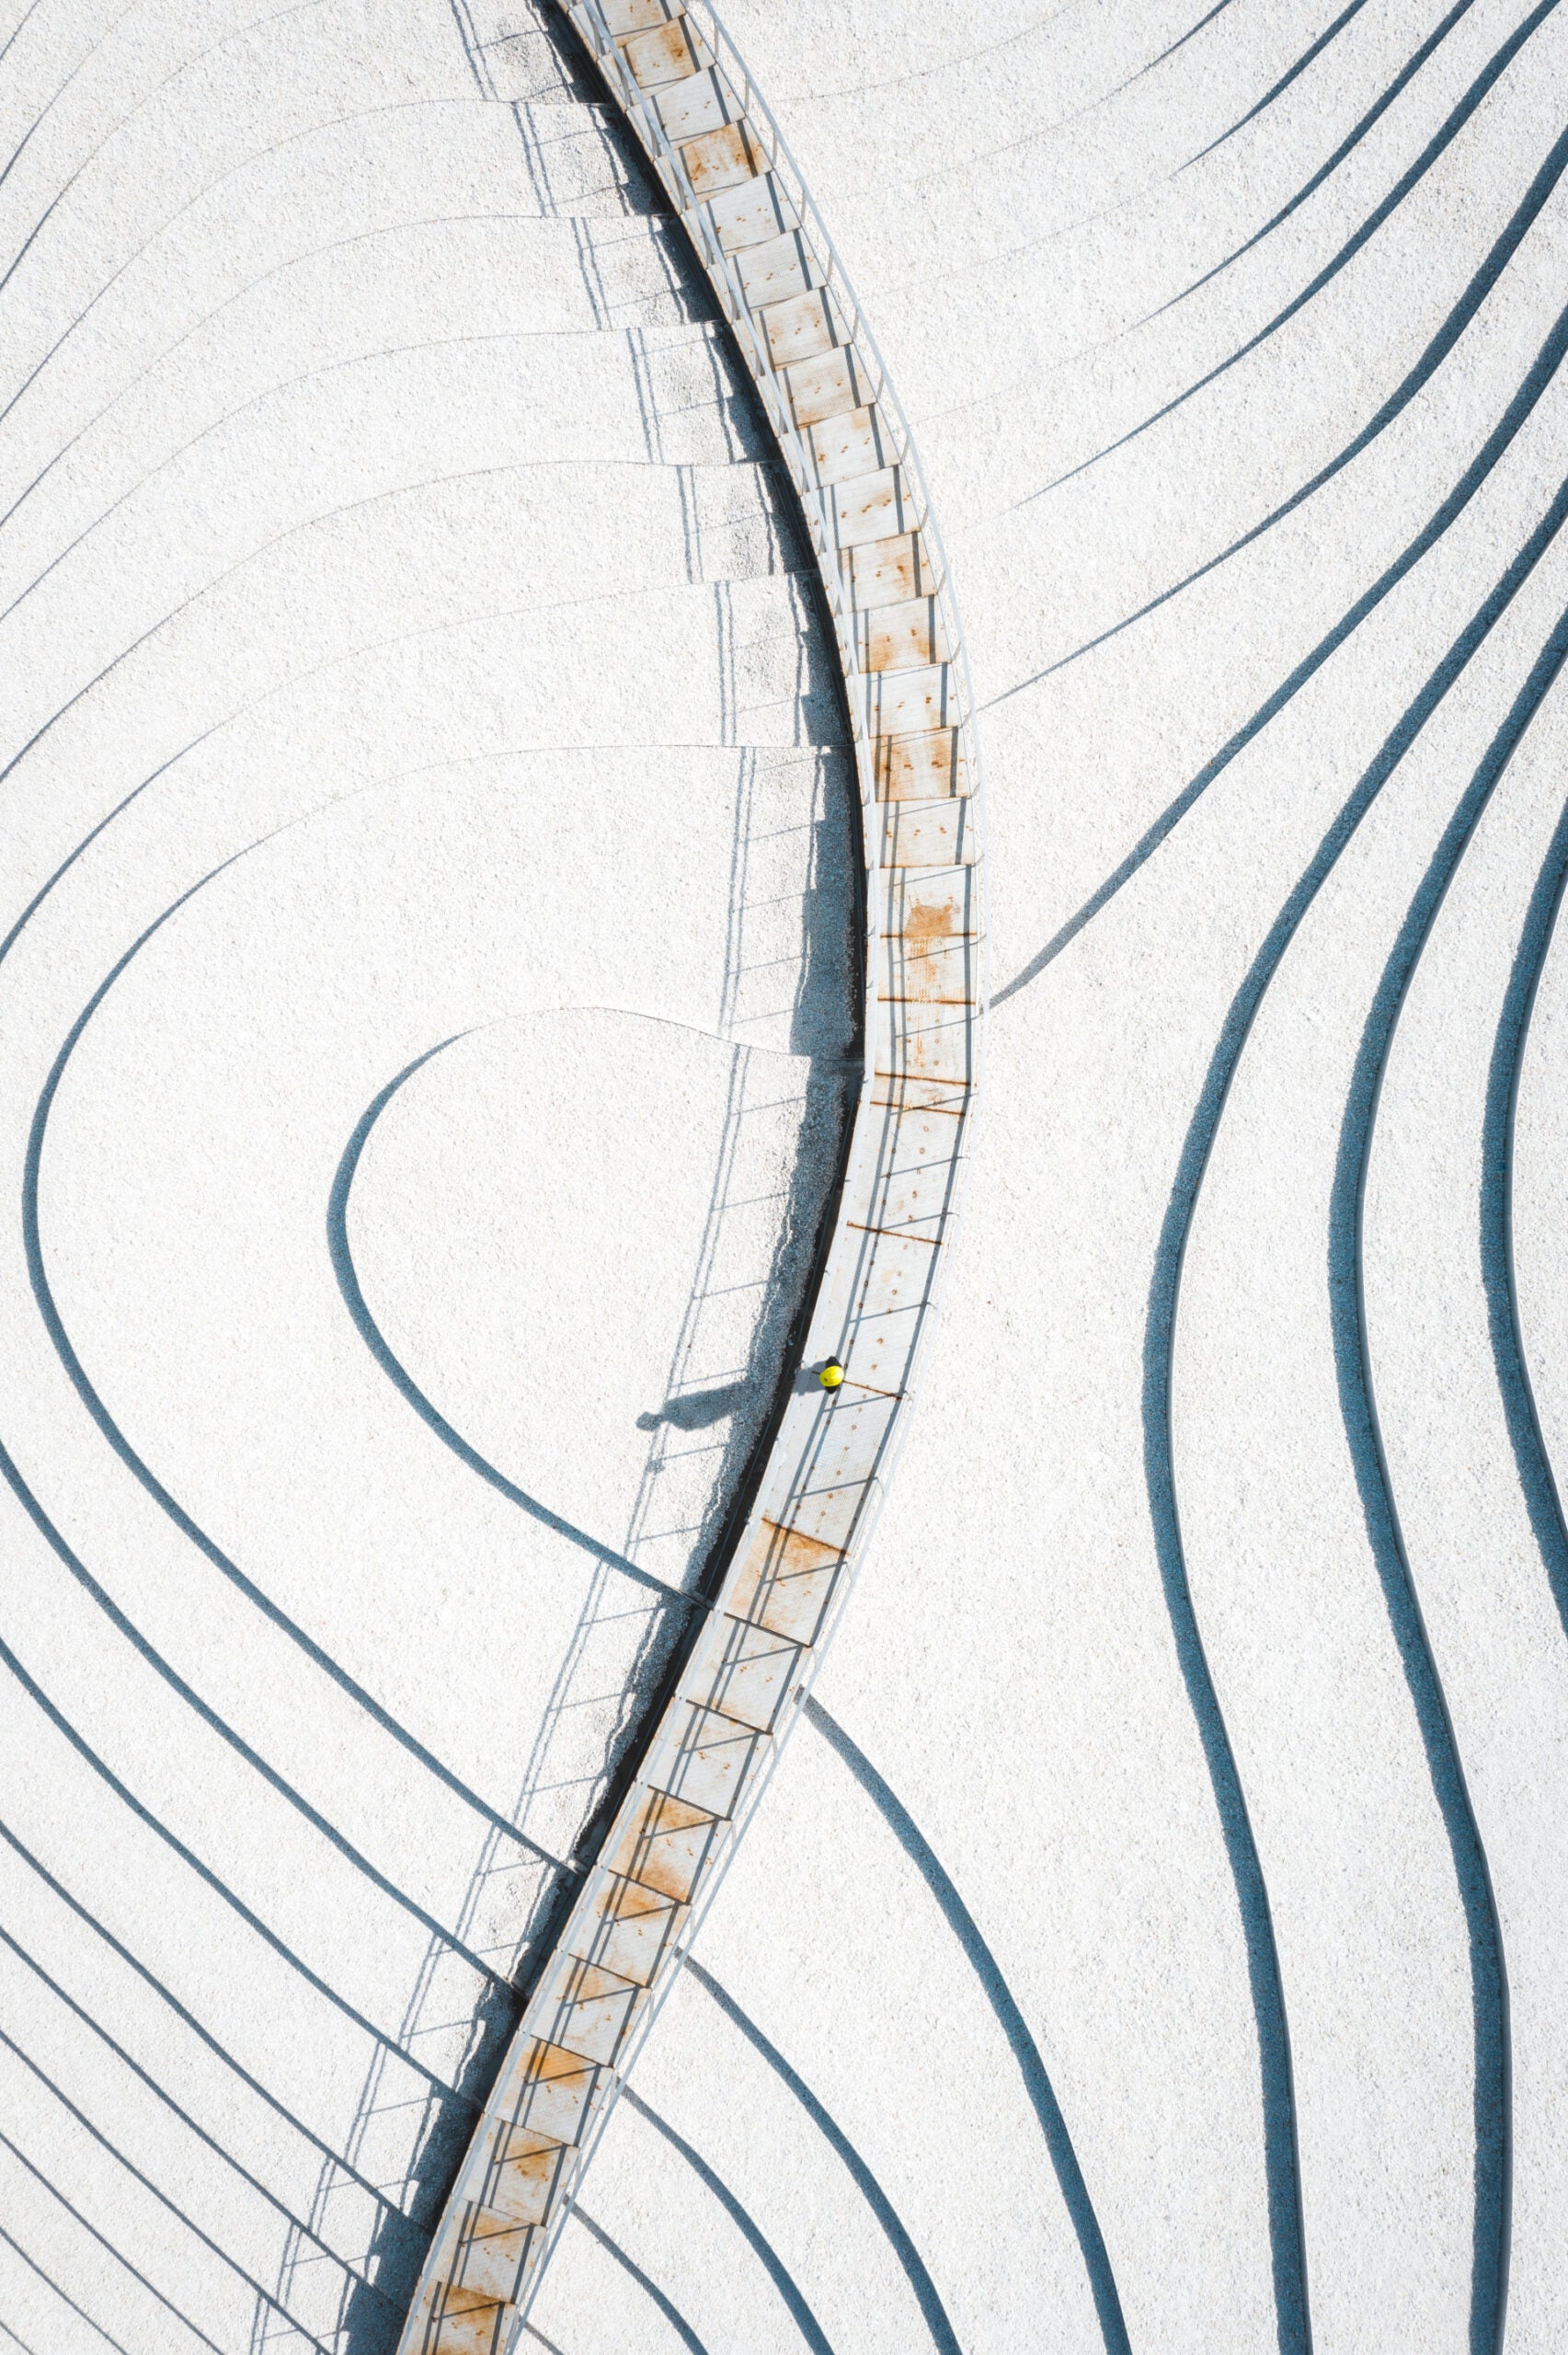 An abstract shot of a walkway over a snow covered field.